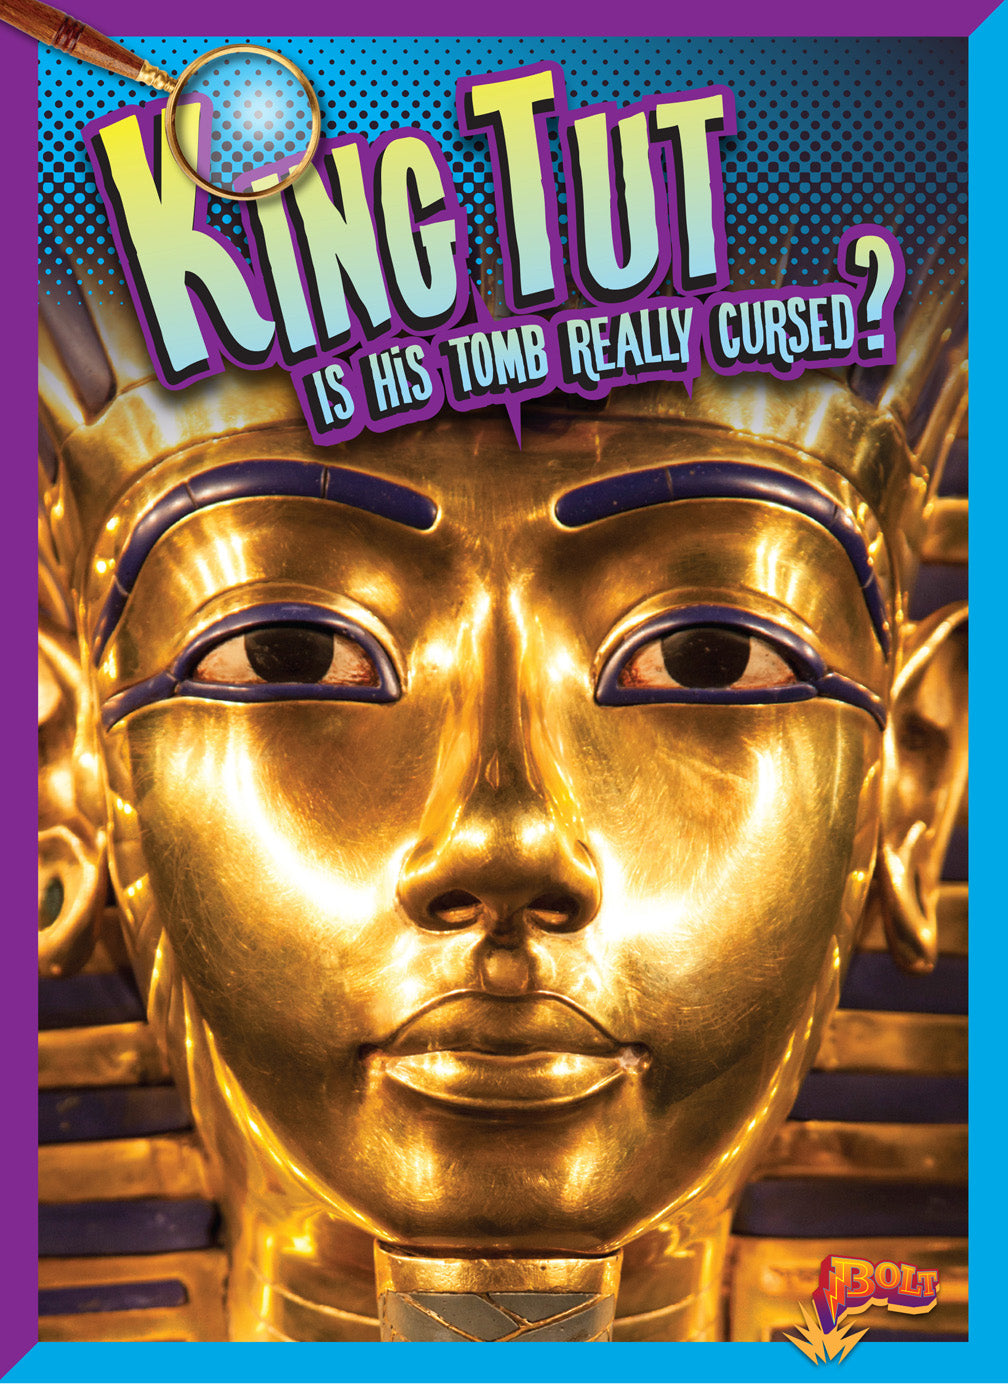 History's Mysteries: King Tut: Is His Tomb Really Cursed?